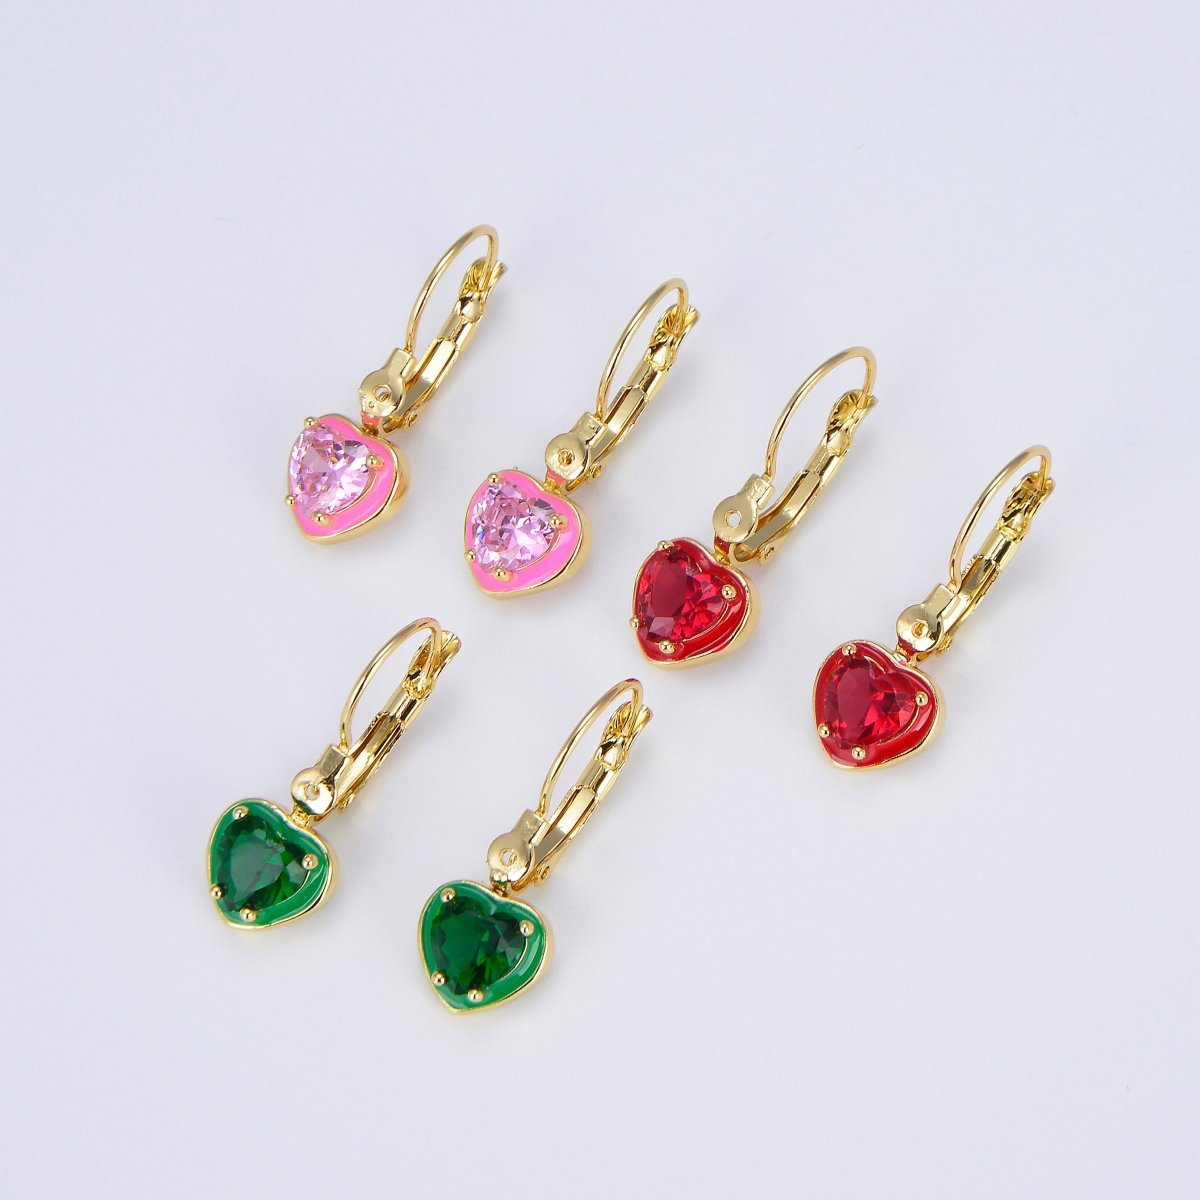 Women Heart Crystals Earrings Drop Dangle Lever Back Hoop Earrings for Girl Green Red Pink Cubic Stone for everyday Wear P-103 P-104 P-105 - DLUXCA